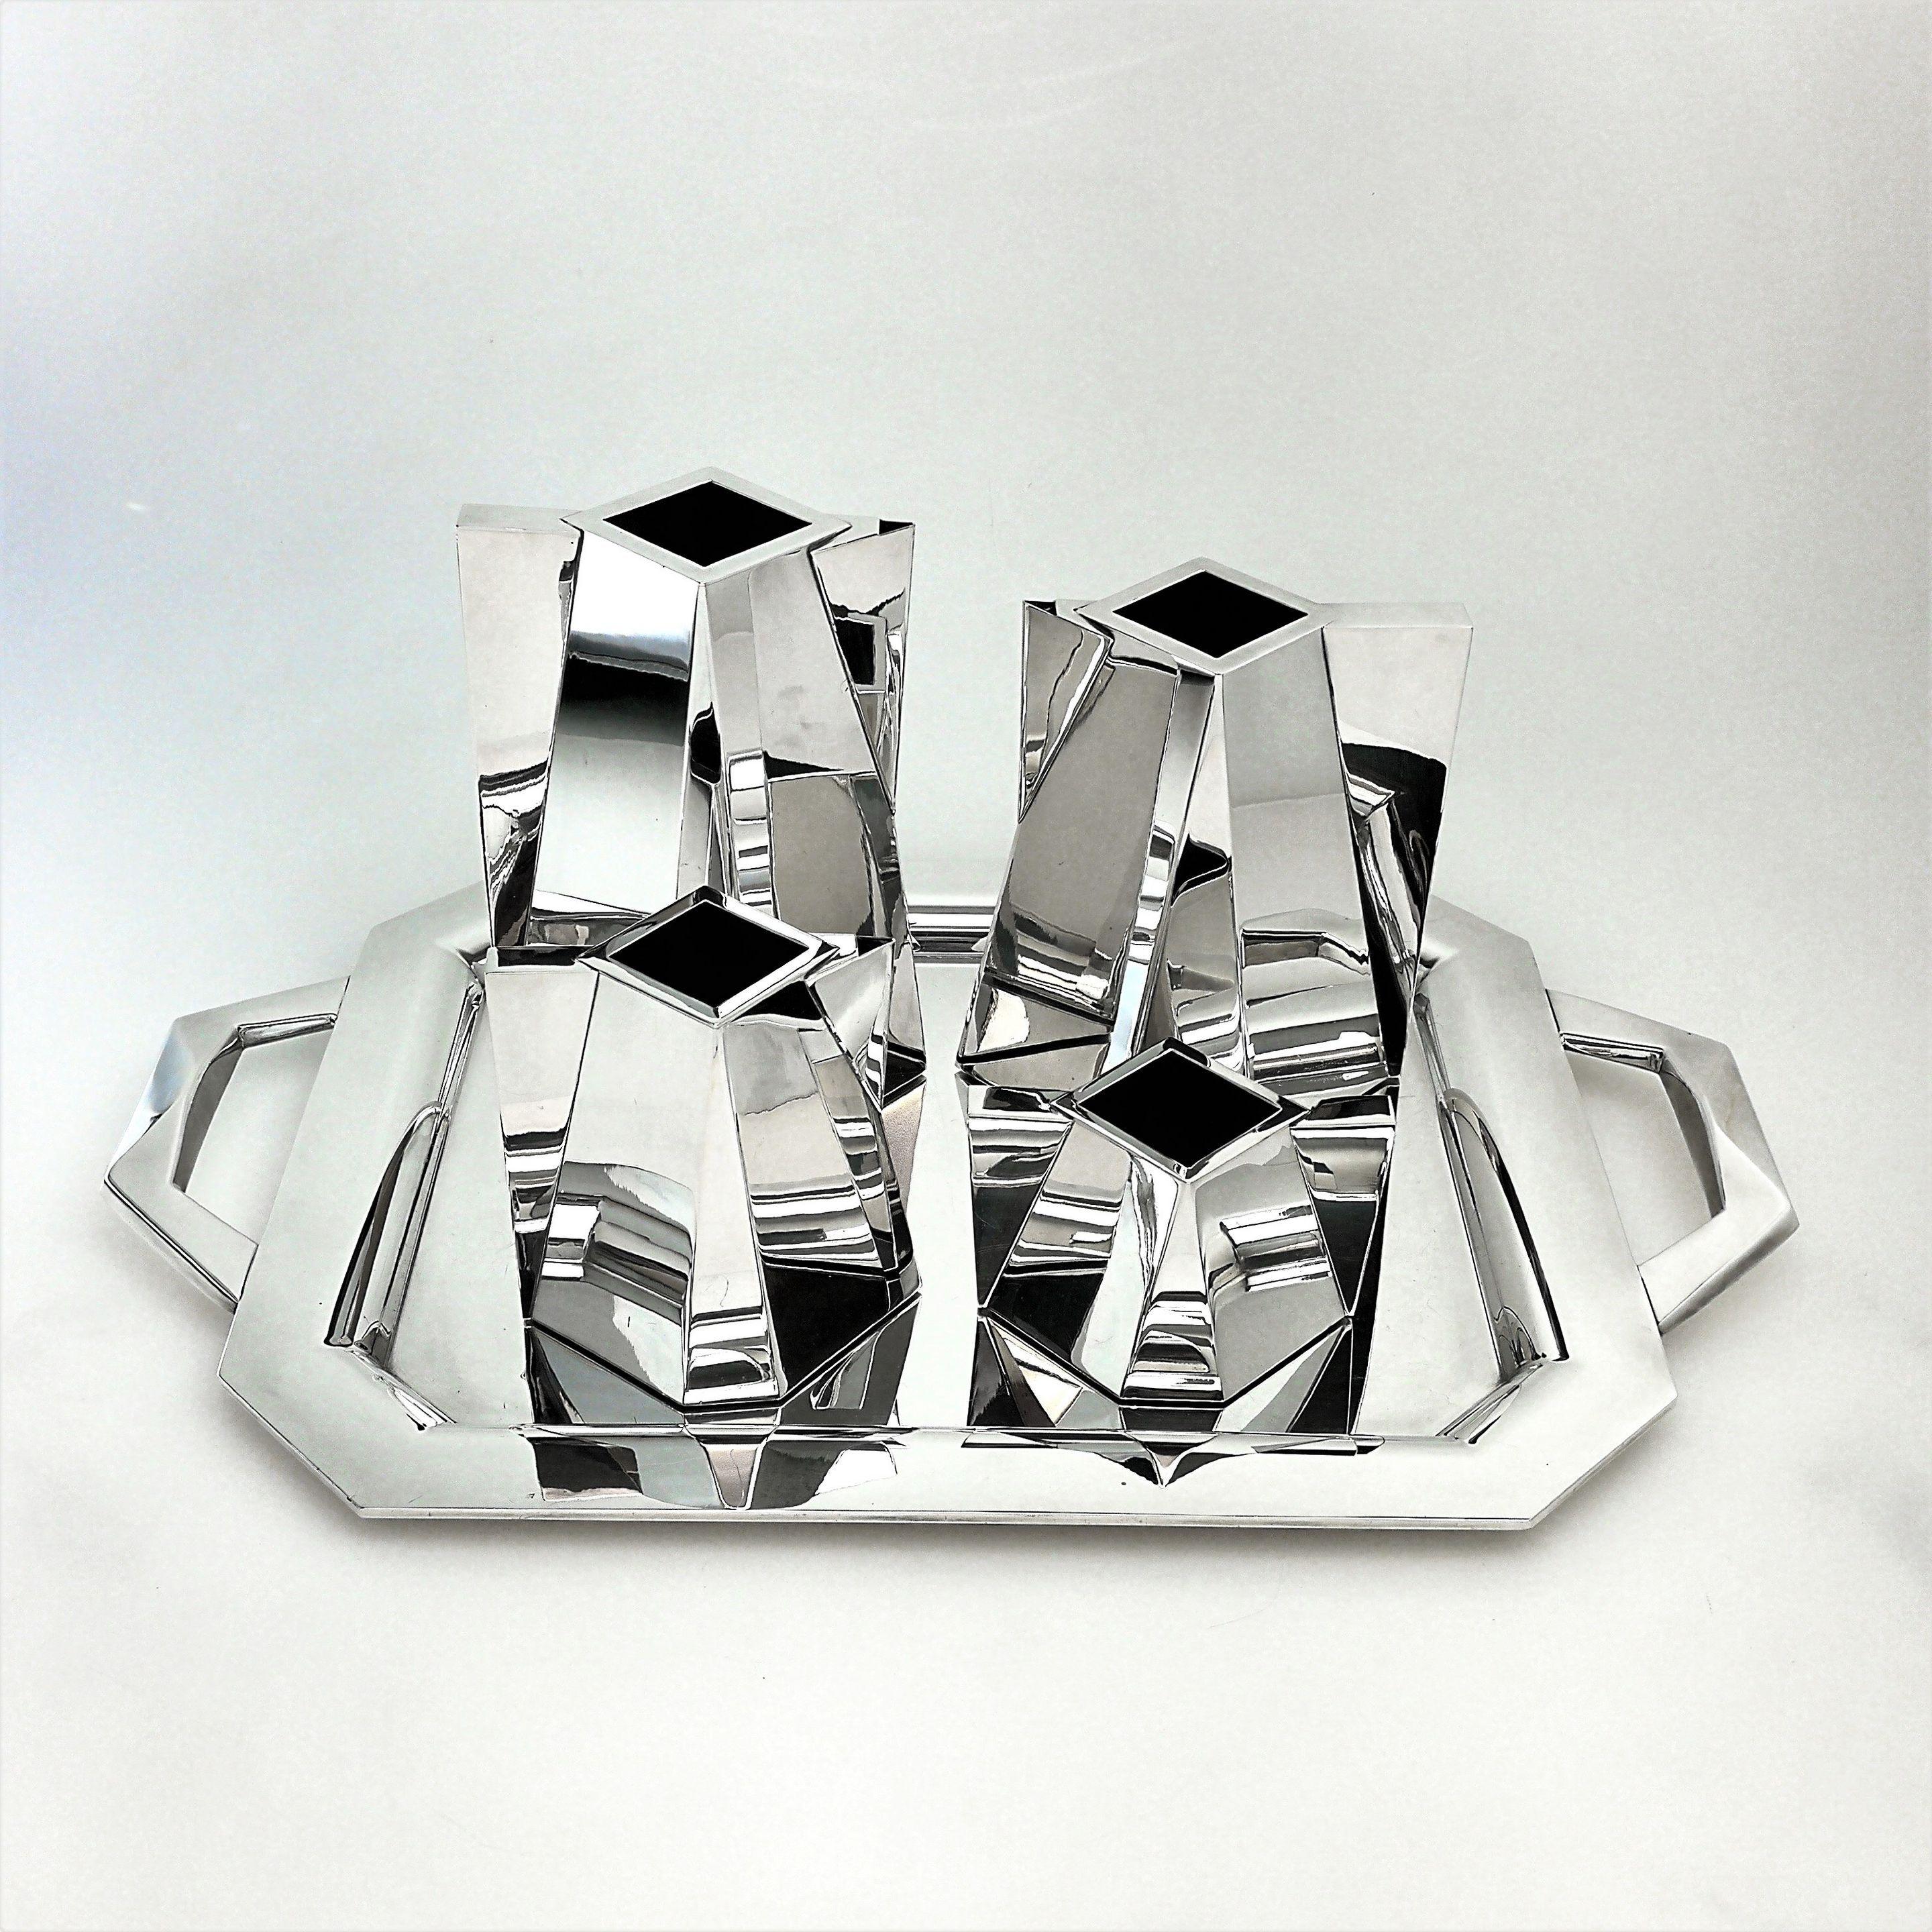 A spectacular sterling silver tea and coffee set on tray by Spanish master Silversmith Damian Garrido. This Tea Service is design incorporating modern geometric facets with an octagonal base narrowing into a square top and incorporated faceted